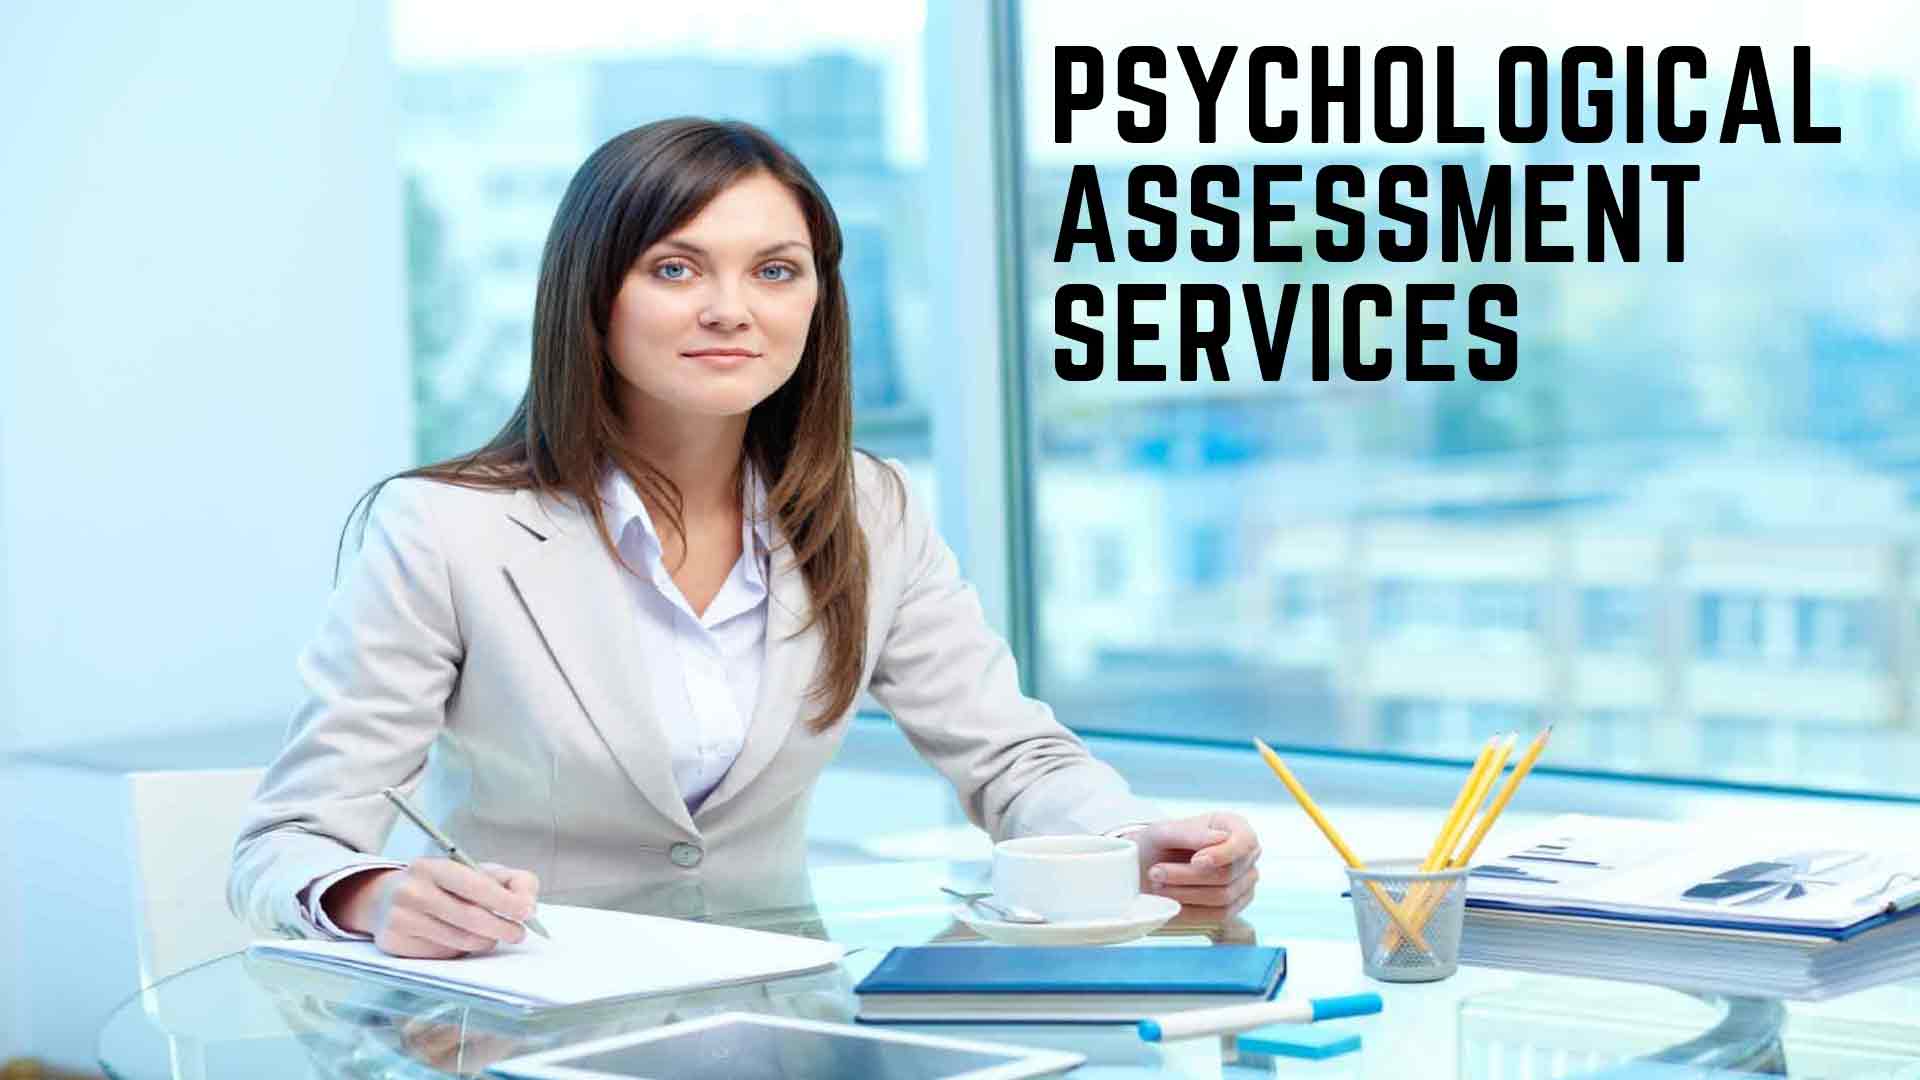 psychological assessment services in nagpur,psychological assessment services,psychological services in nagpur